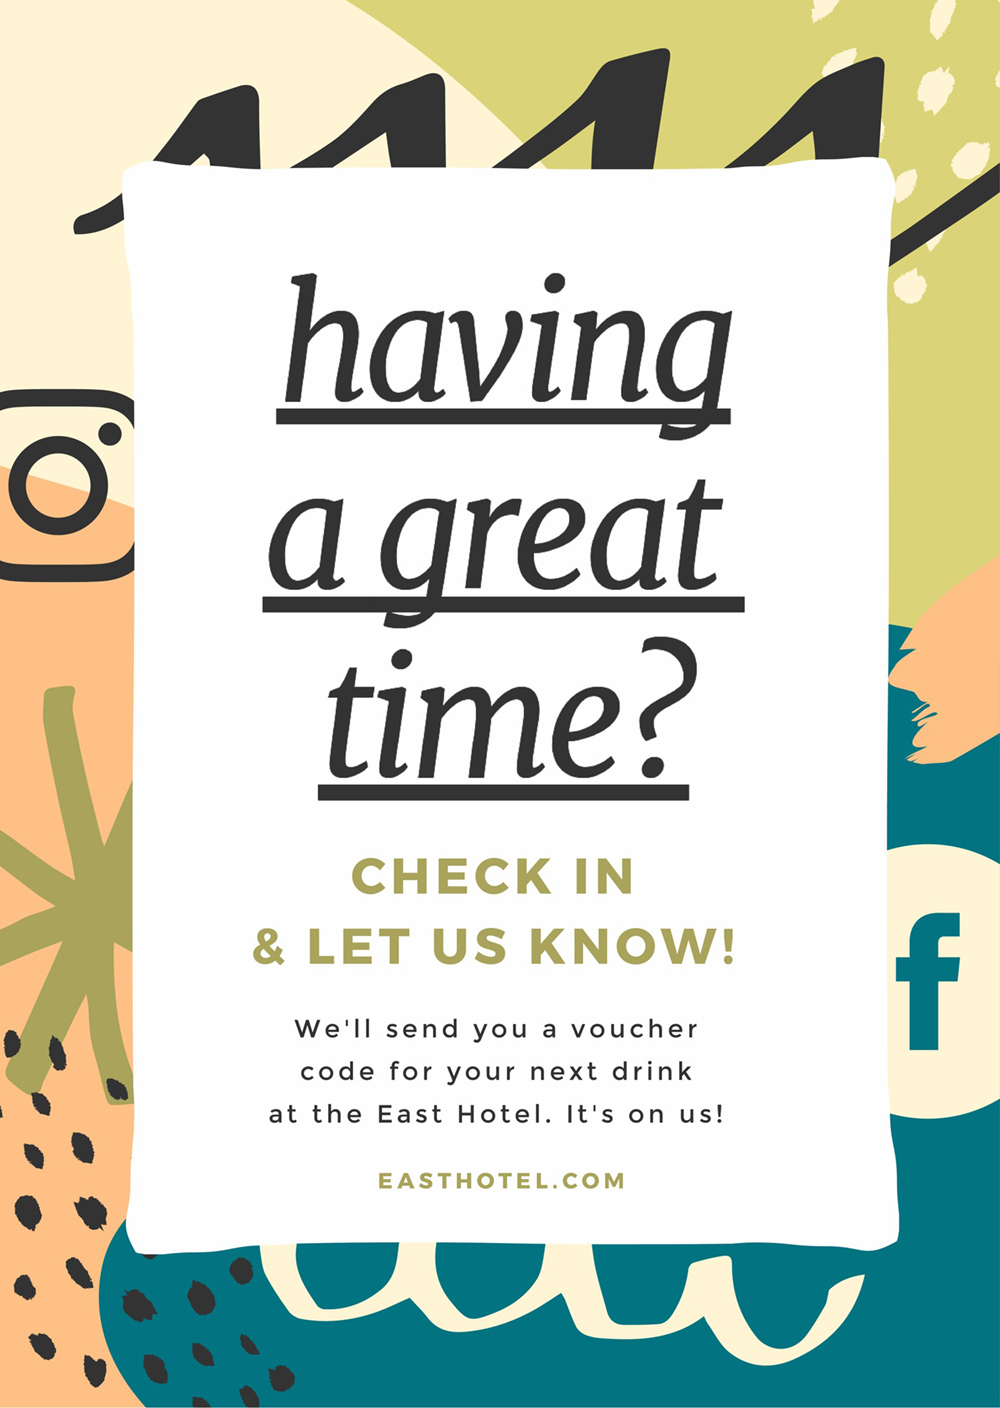 Poster encouraging Checkins at a Venue - How to Get More Event Bookings at your Venue in 2018 - 21 Easy Tips